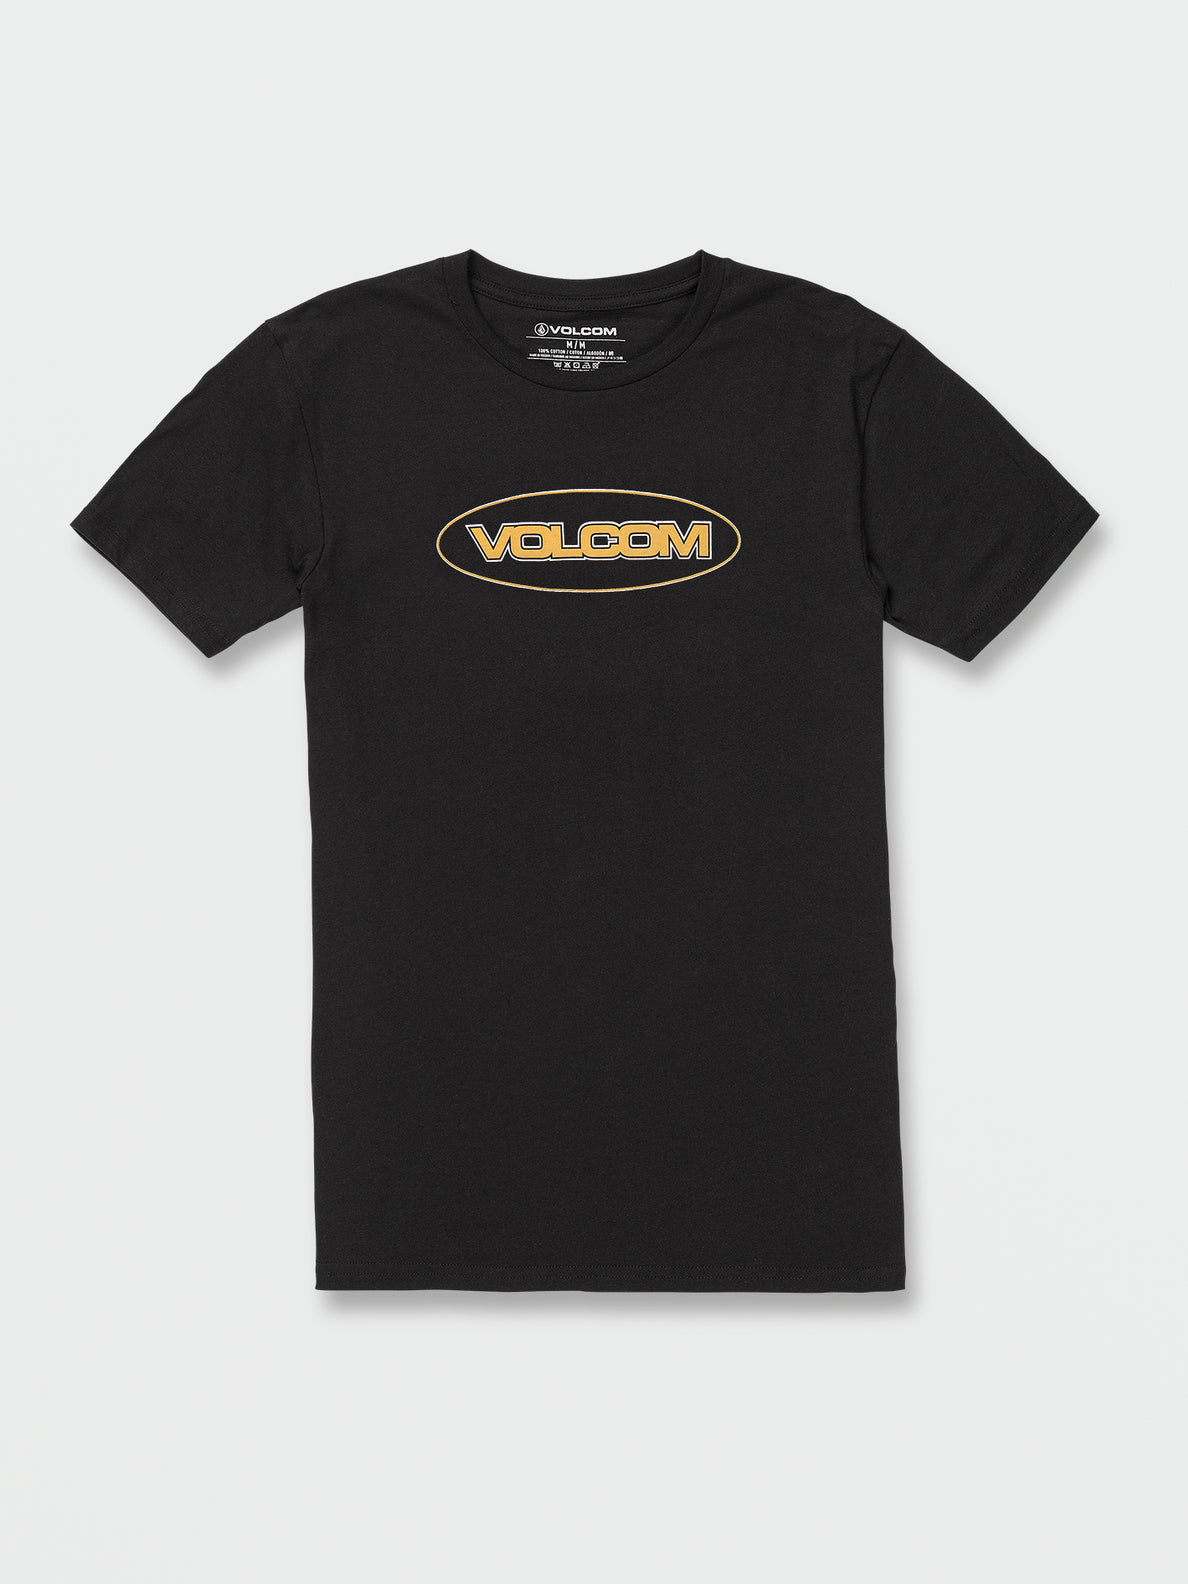 Dial Up Short Sleeve Tee - Black (A3542201_BLK) [F]